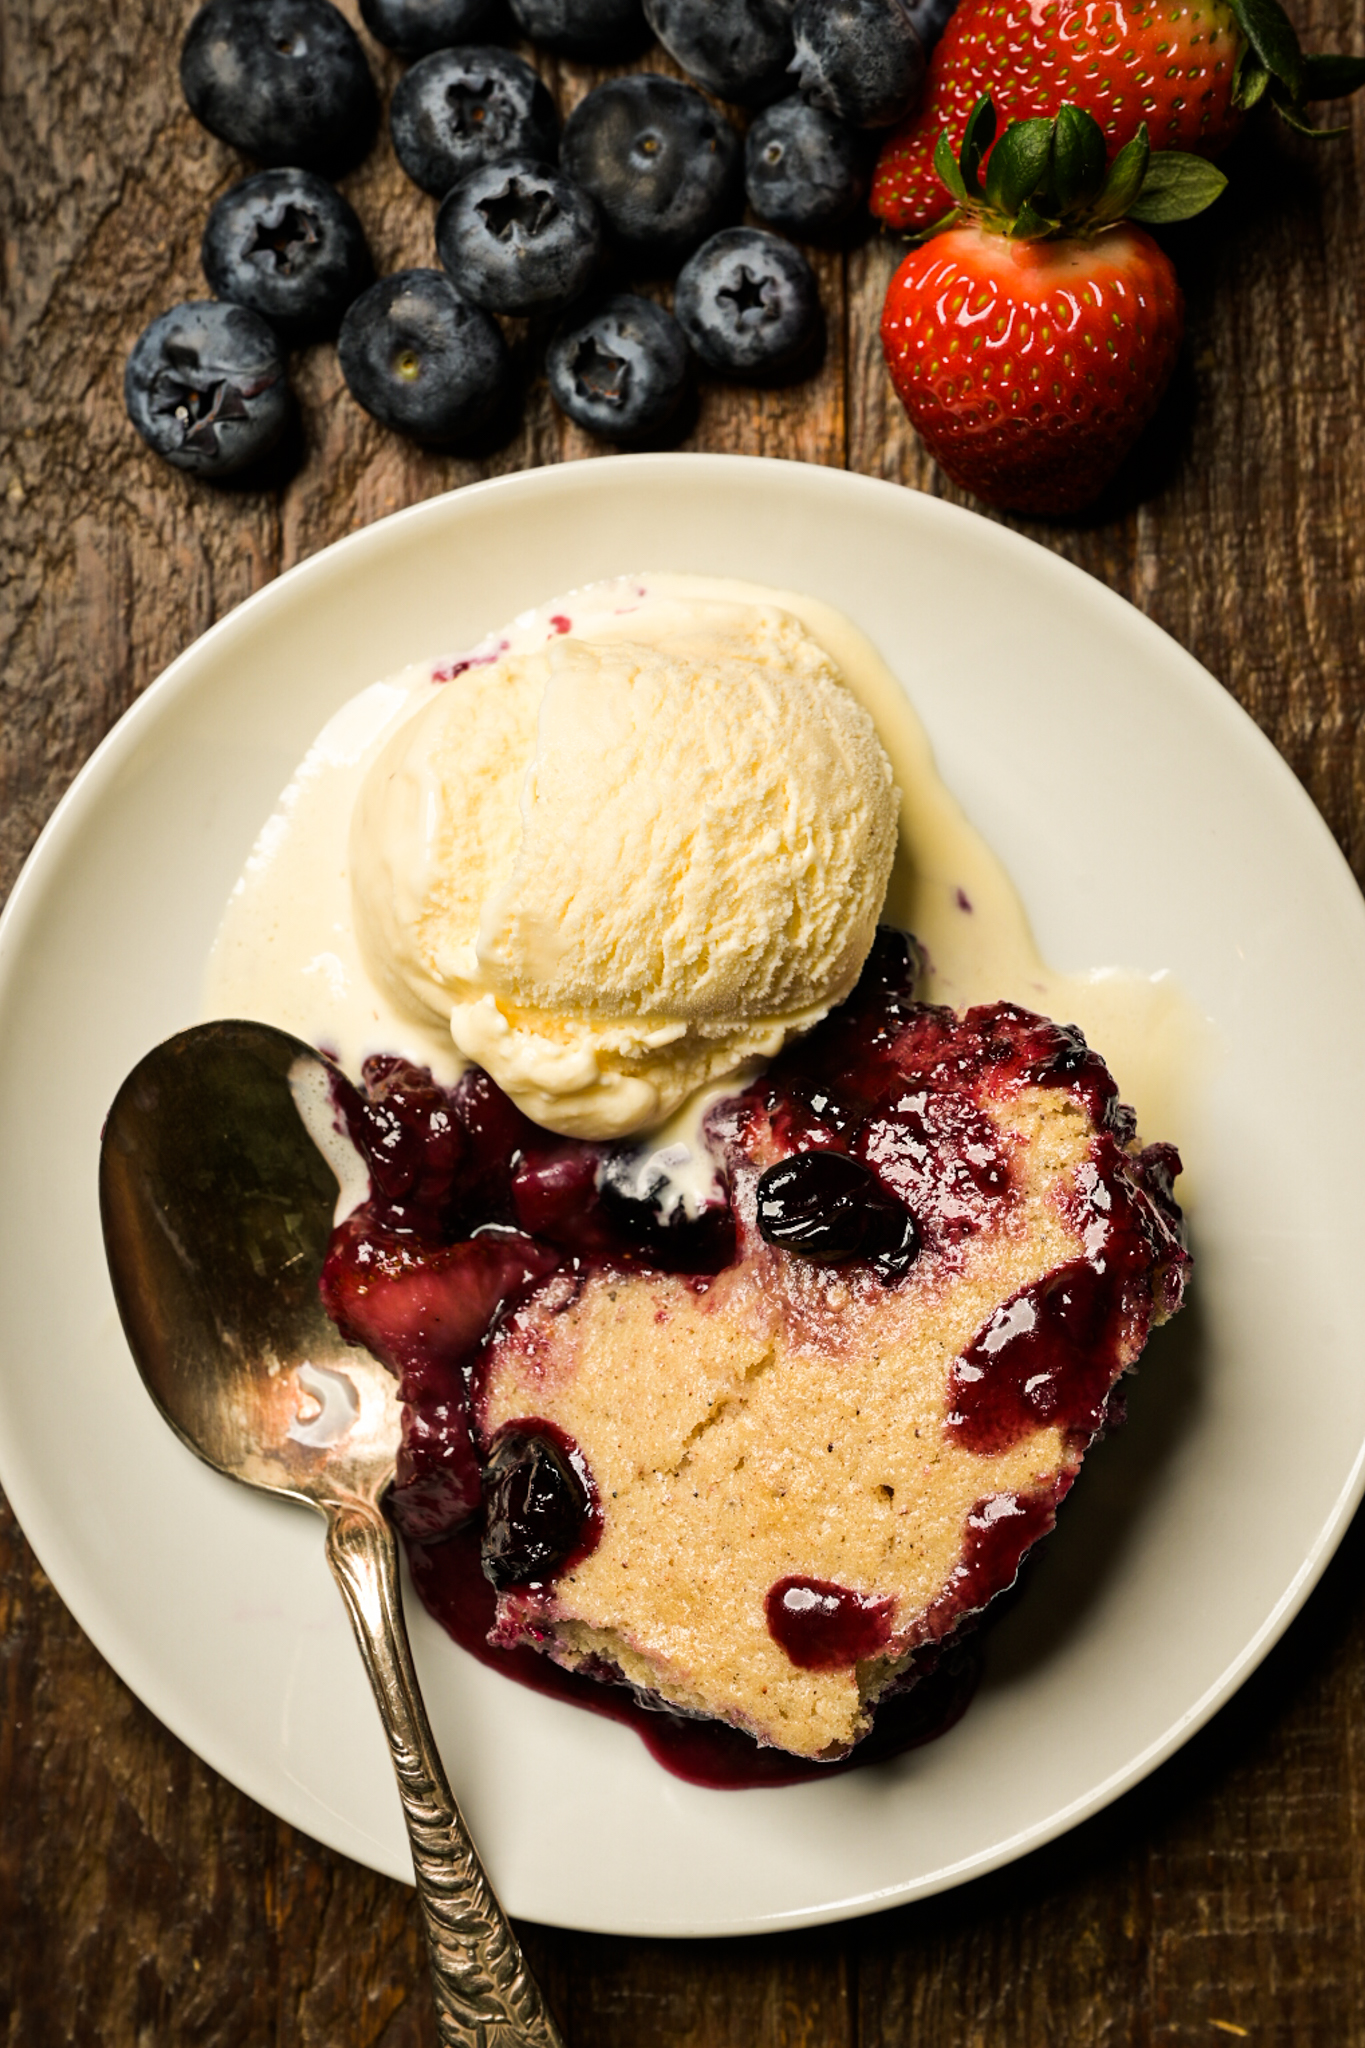 Grilled cobbler with blueberries and strawberries, served with vanilla ice cream